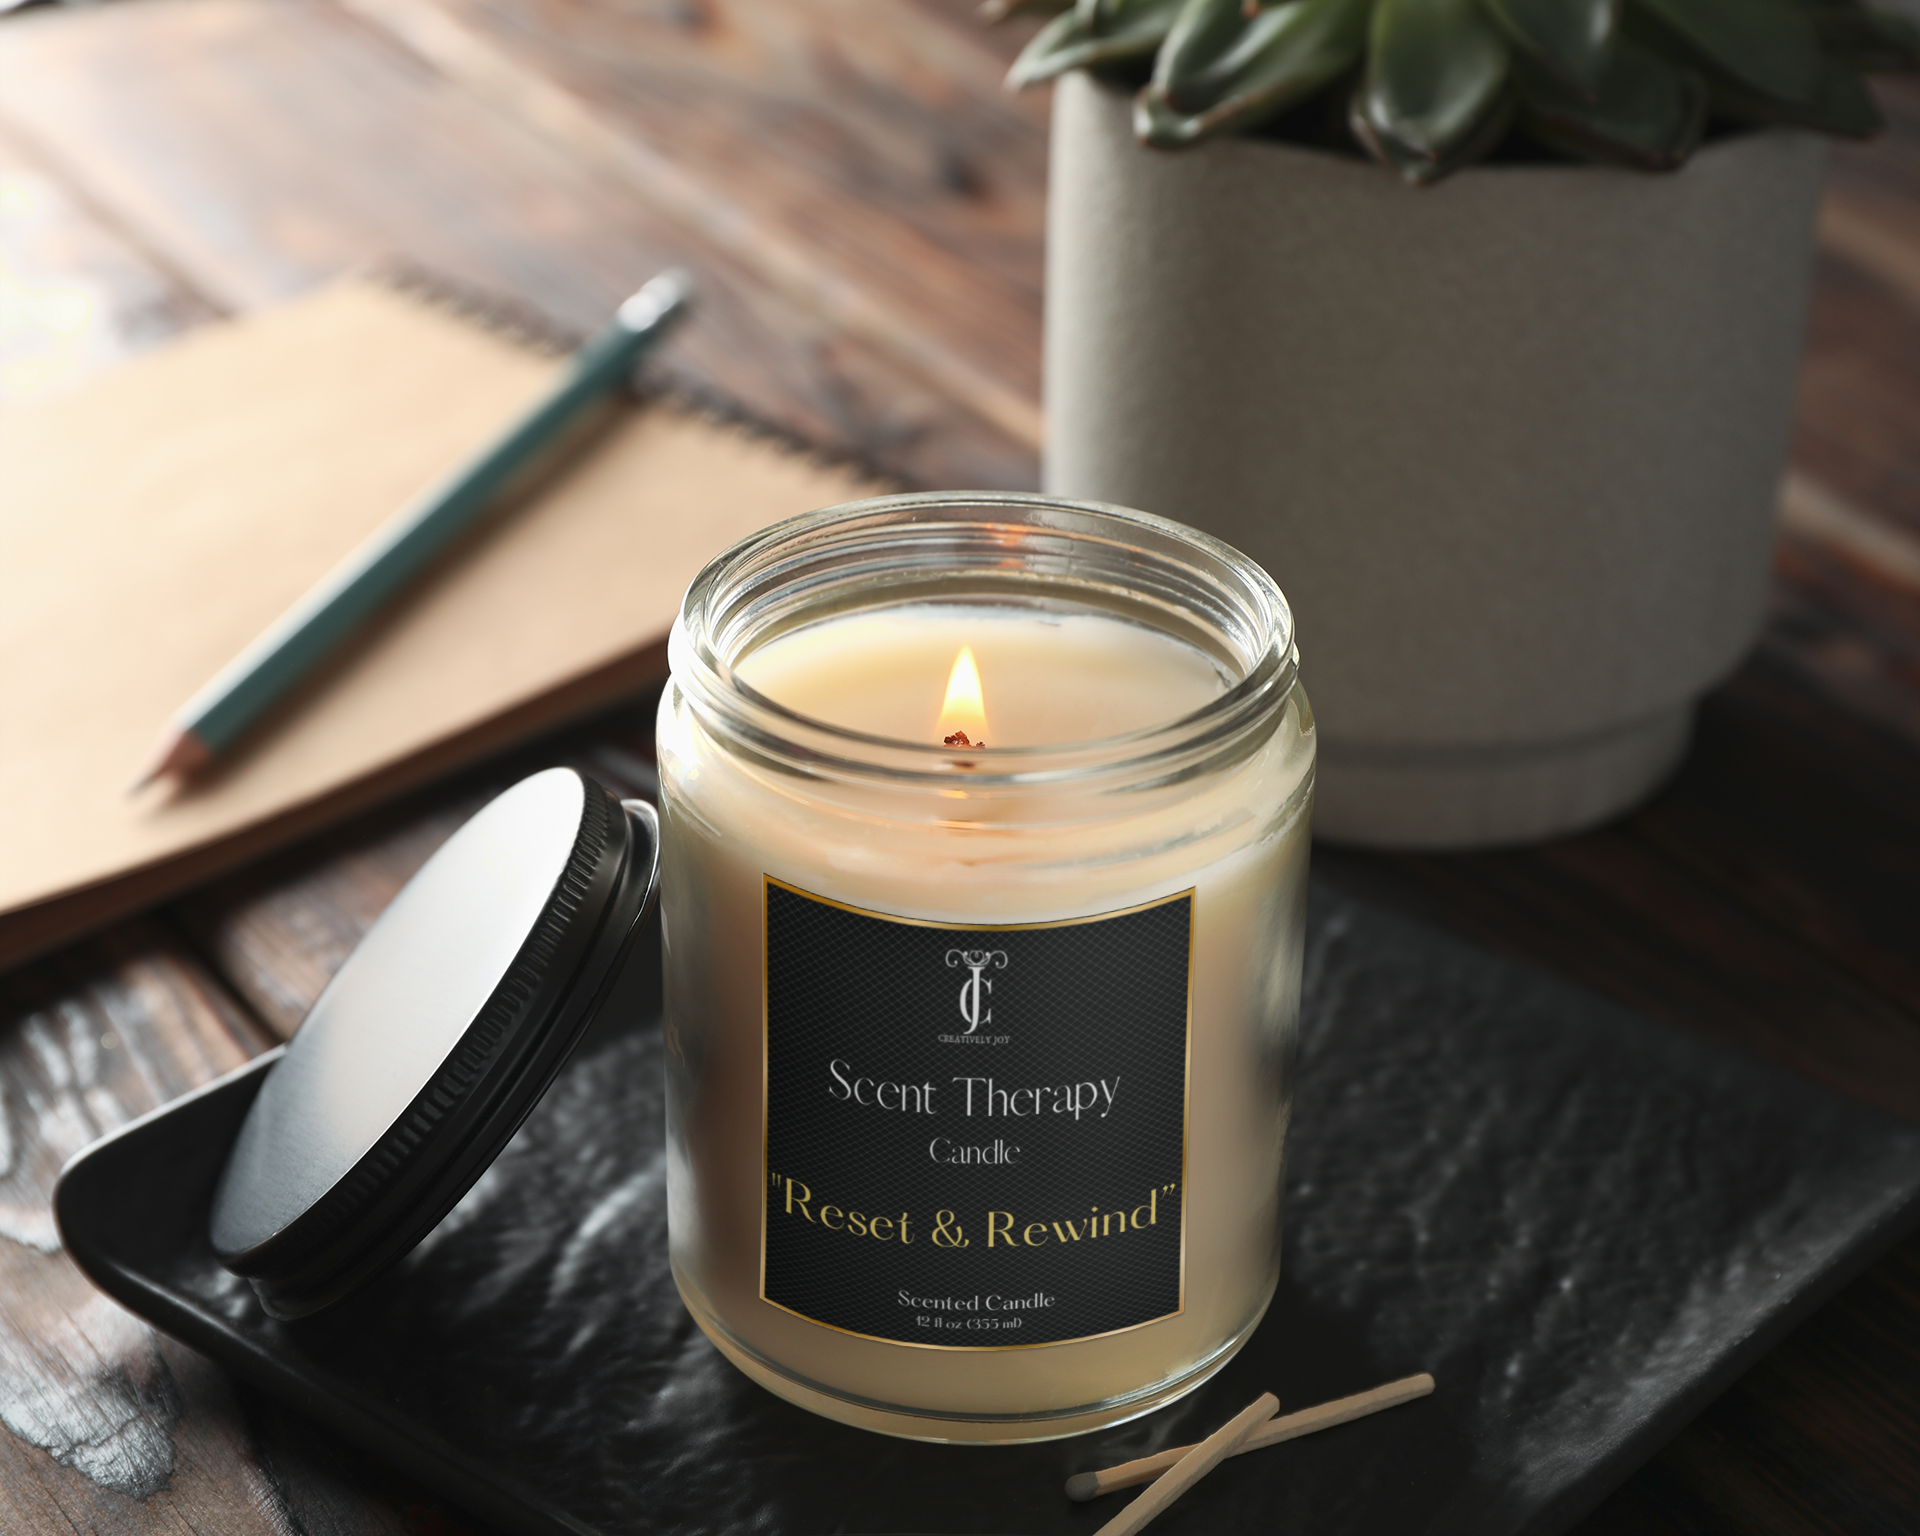 Reset & Rewind Scent Therapy Candles